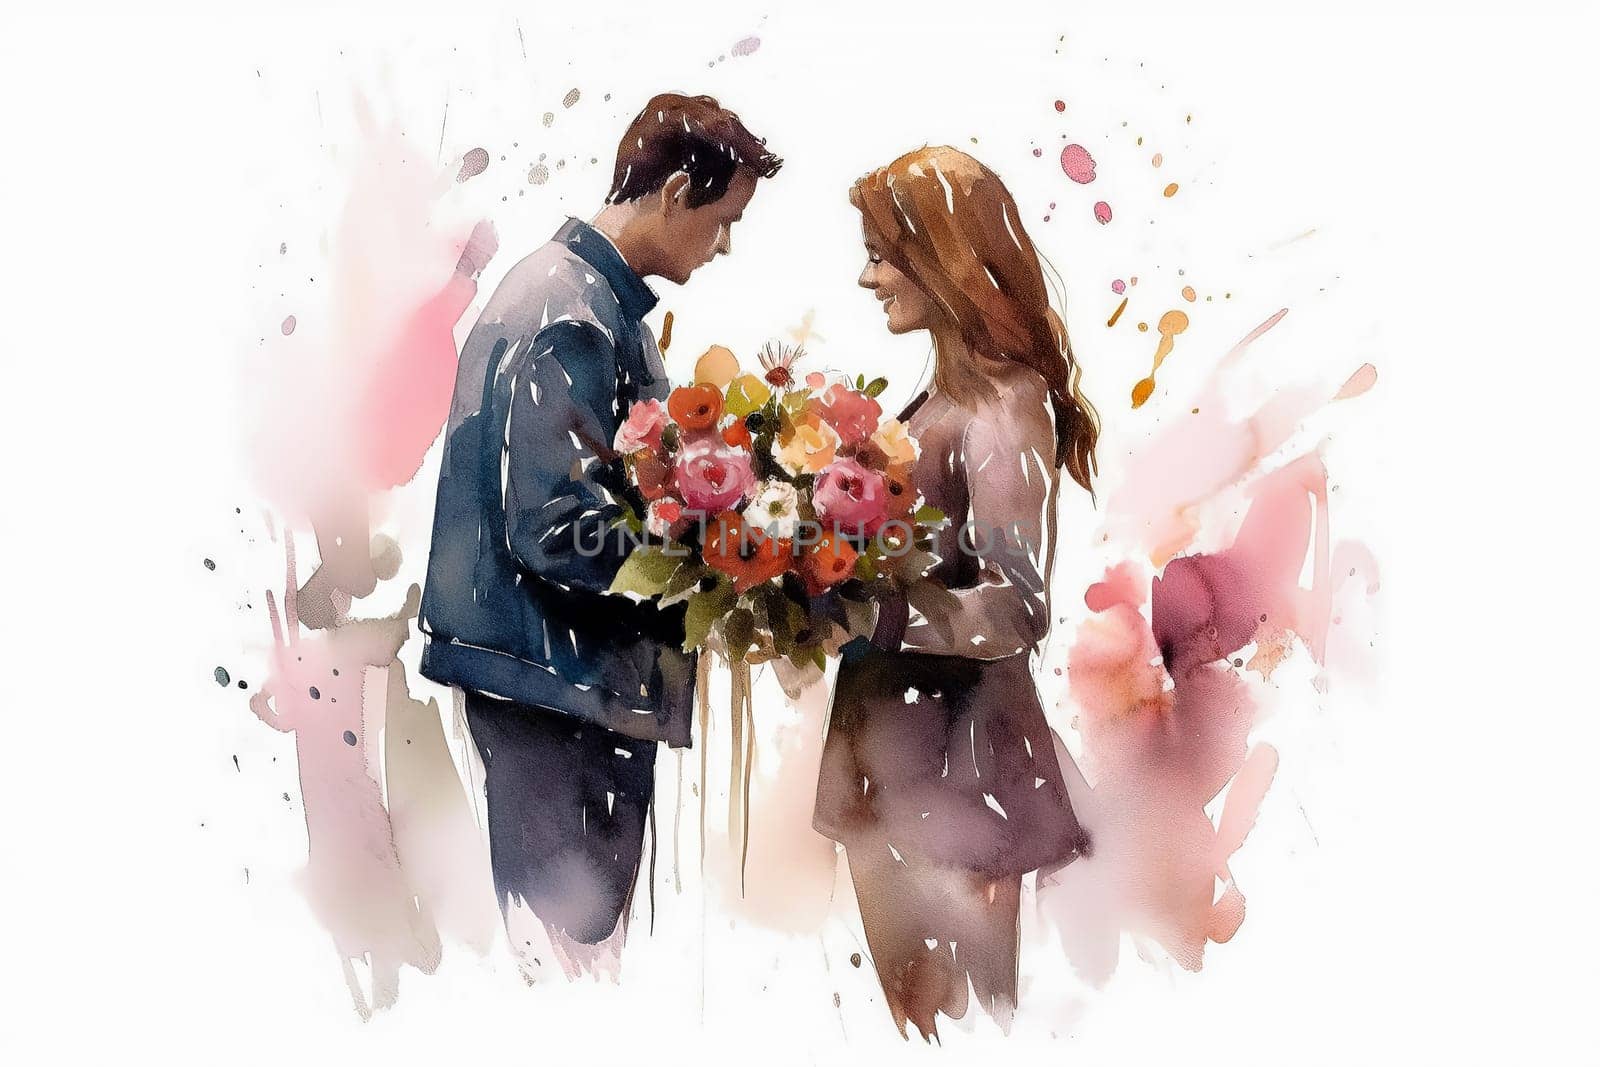 Experience the tenderness of a romantic date as a watercolor illustration beautifully depicts a guy presenting a bouquet of flowers to a delighted girl.